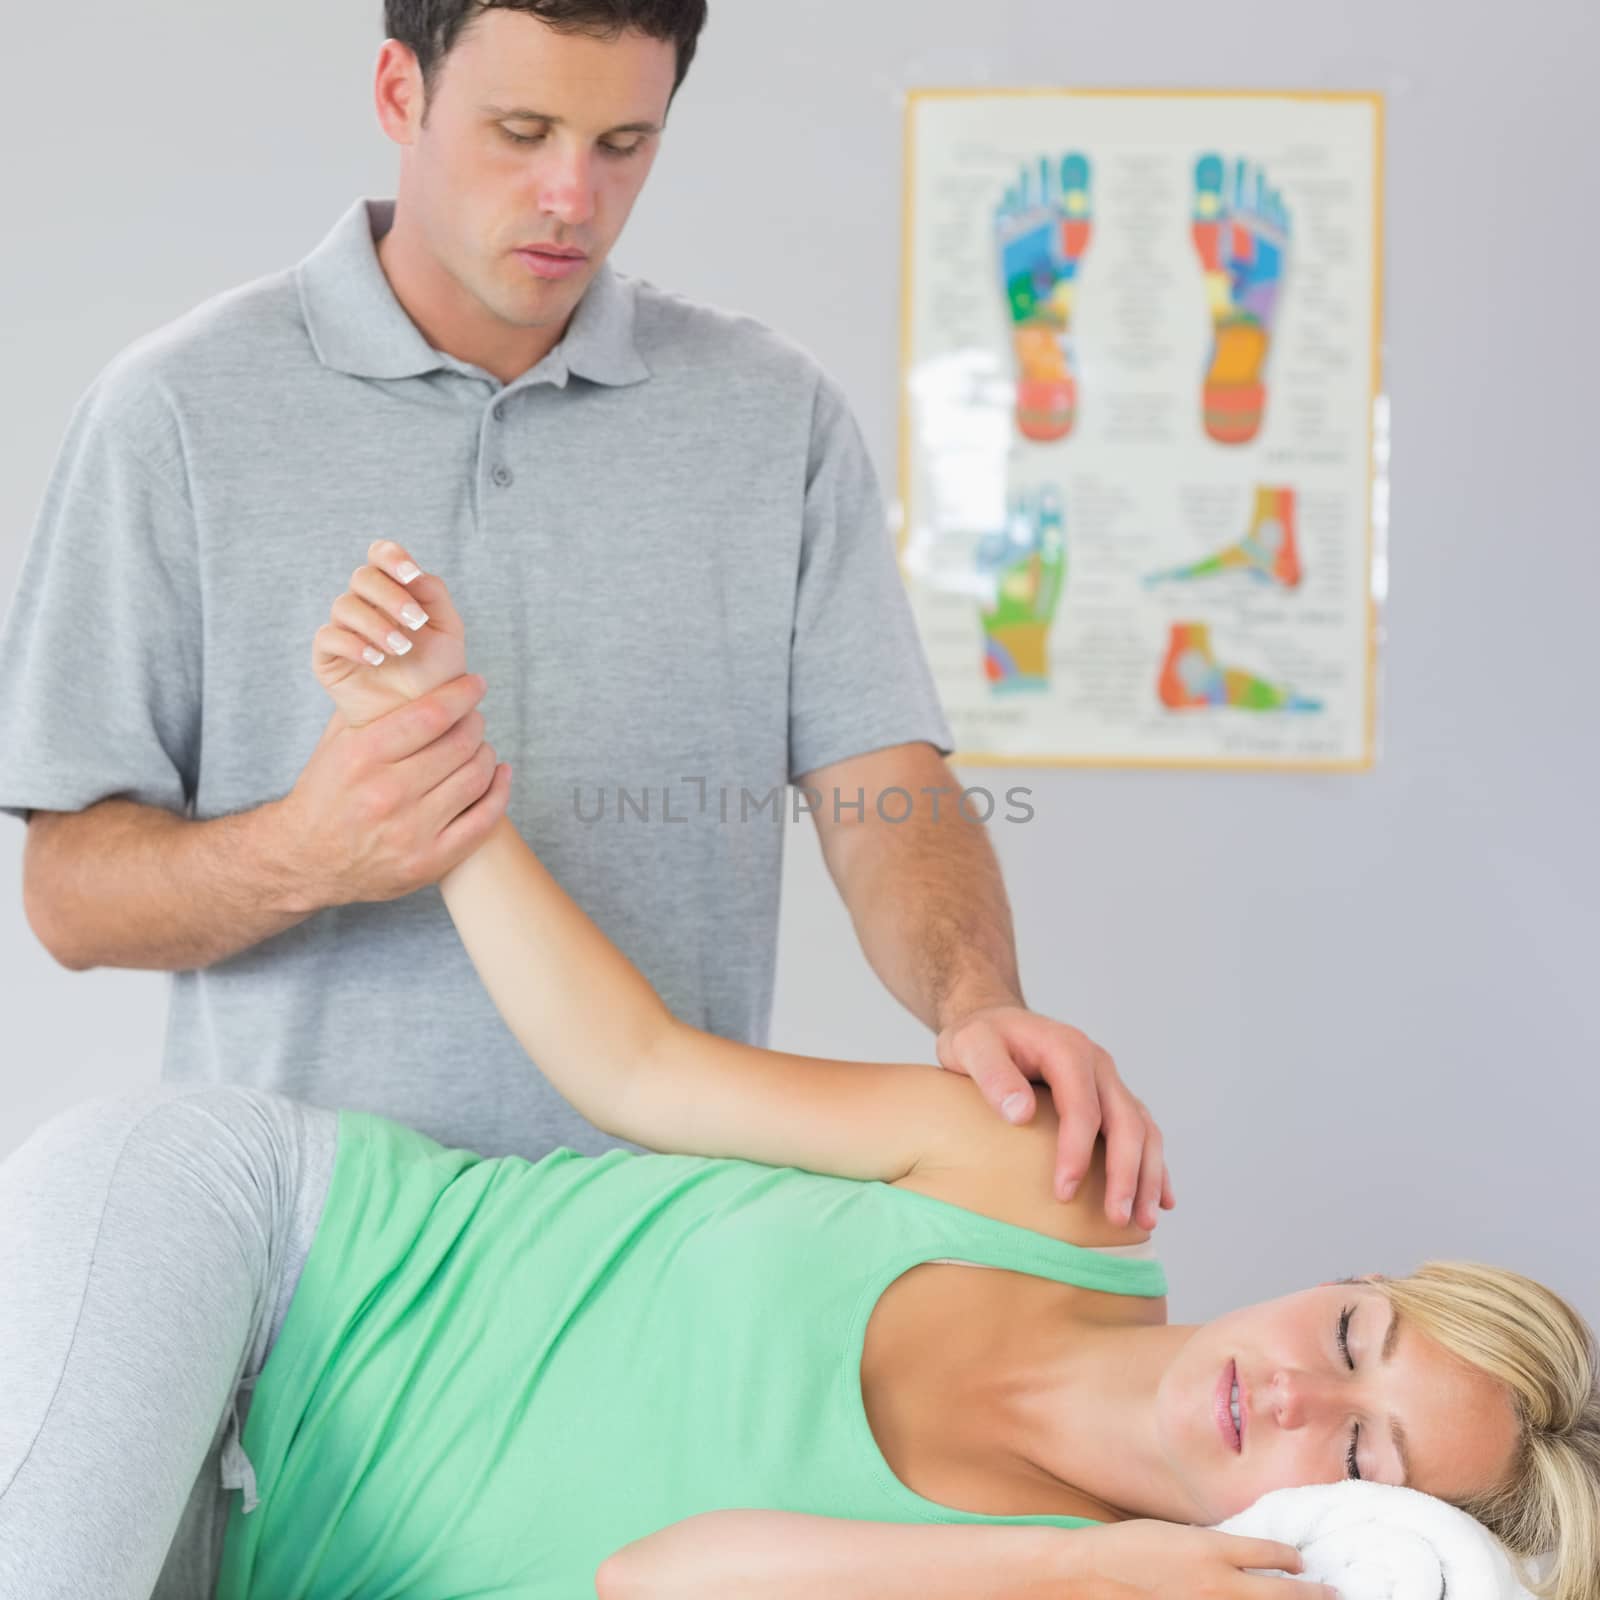 Handsome physiotherapist treating patients arm in bright office